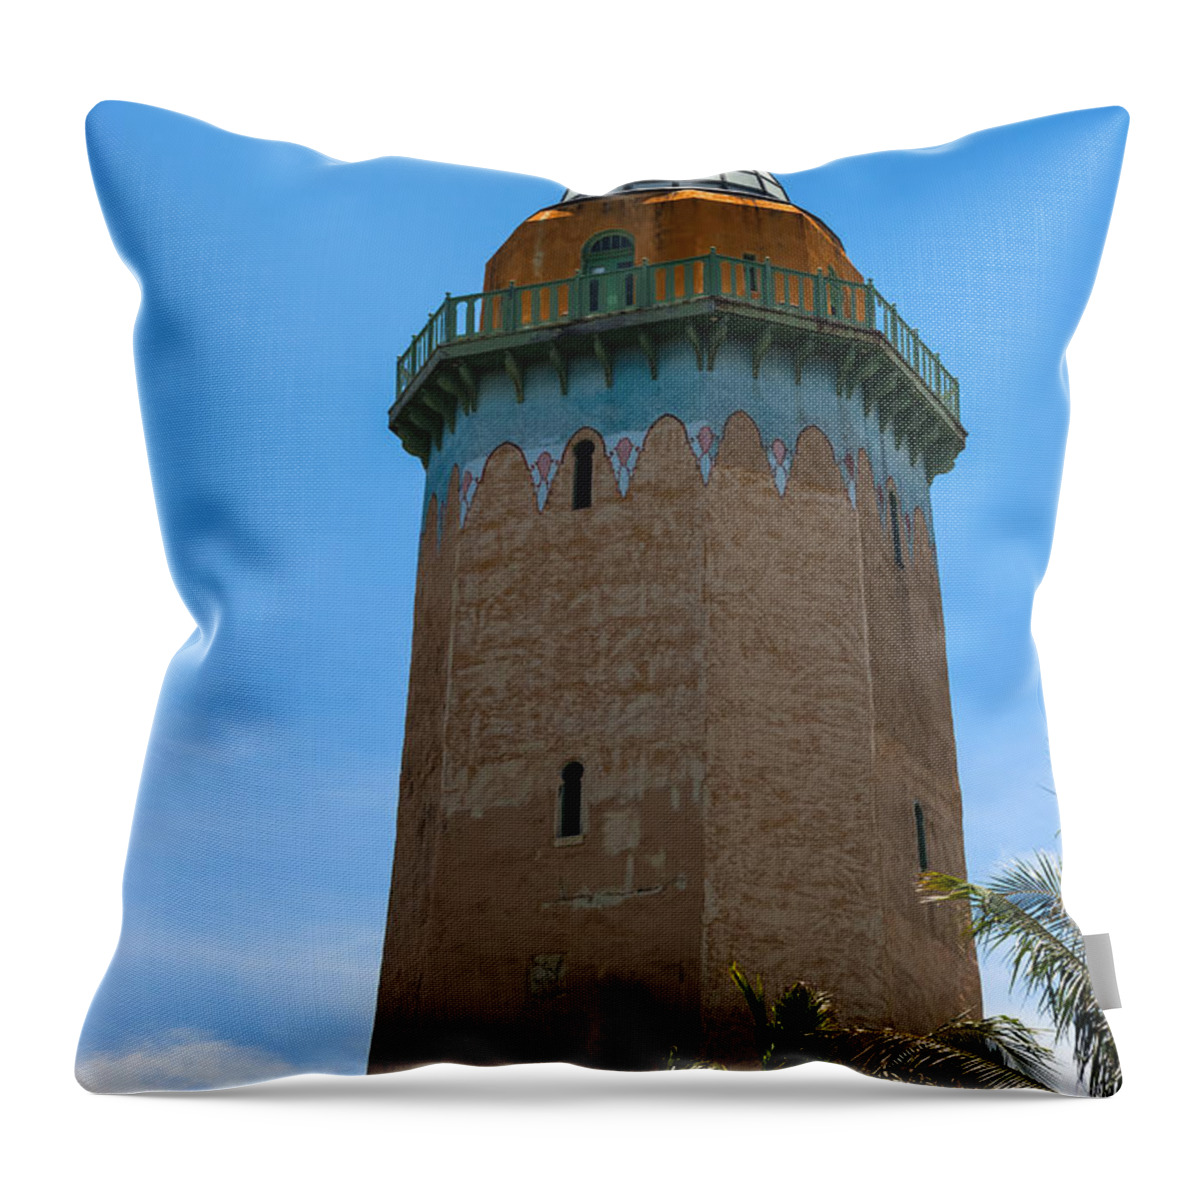 Alhambra Water Tower Throw Pillow featuring the photograph The Alhambra Water Tower by Ed Gleichman